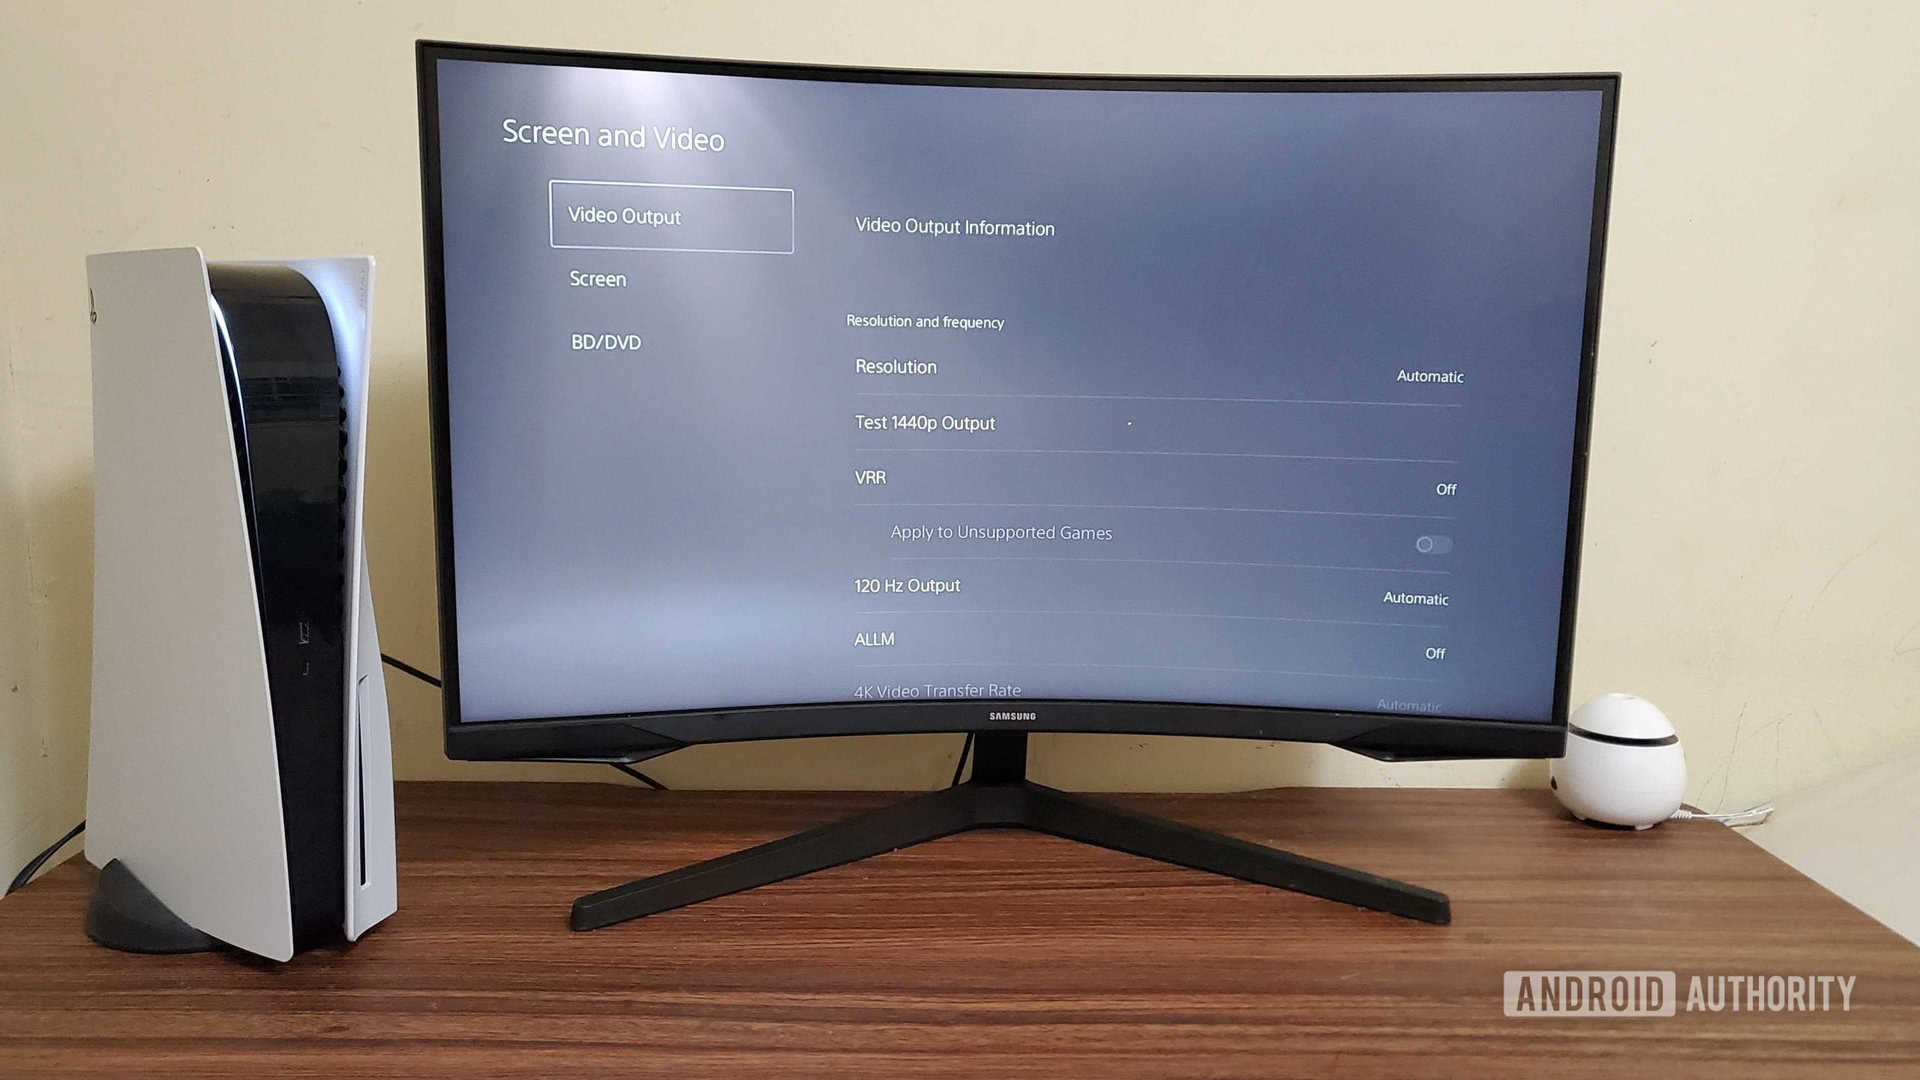 Want to get a 1440p 144Hz monitor for my PS5. Need help with